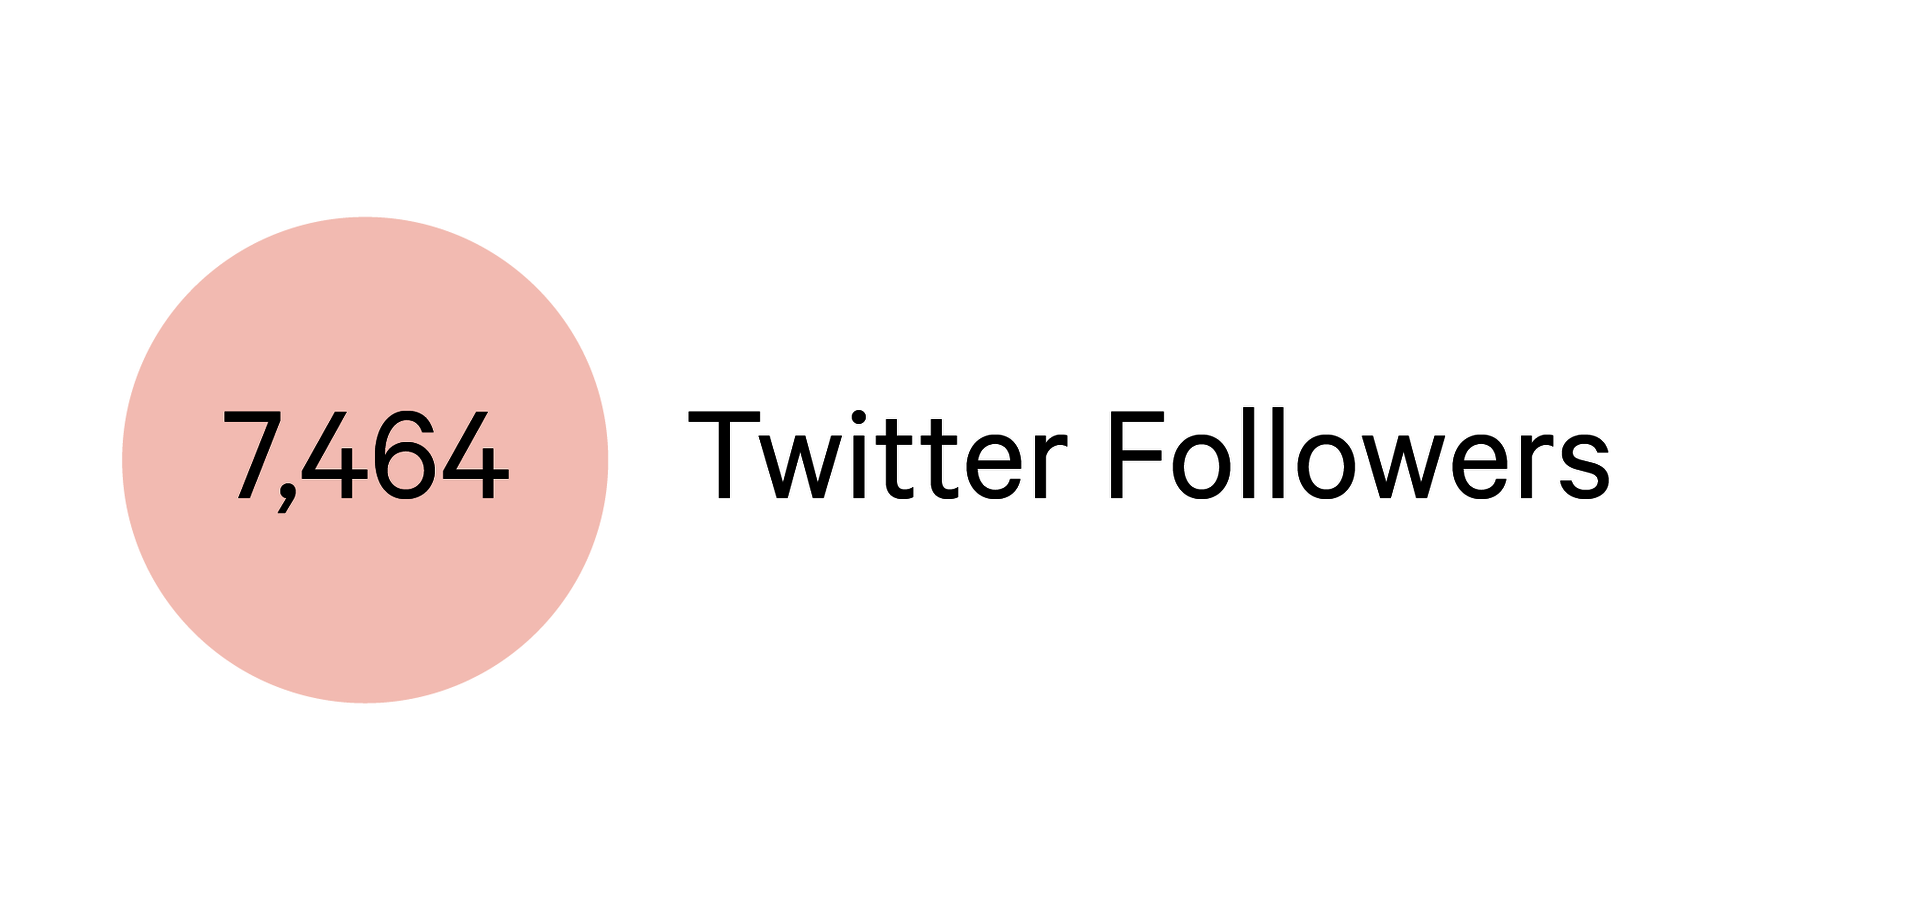 Pink circle with text that says: “7,464 Twitter Followers.”